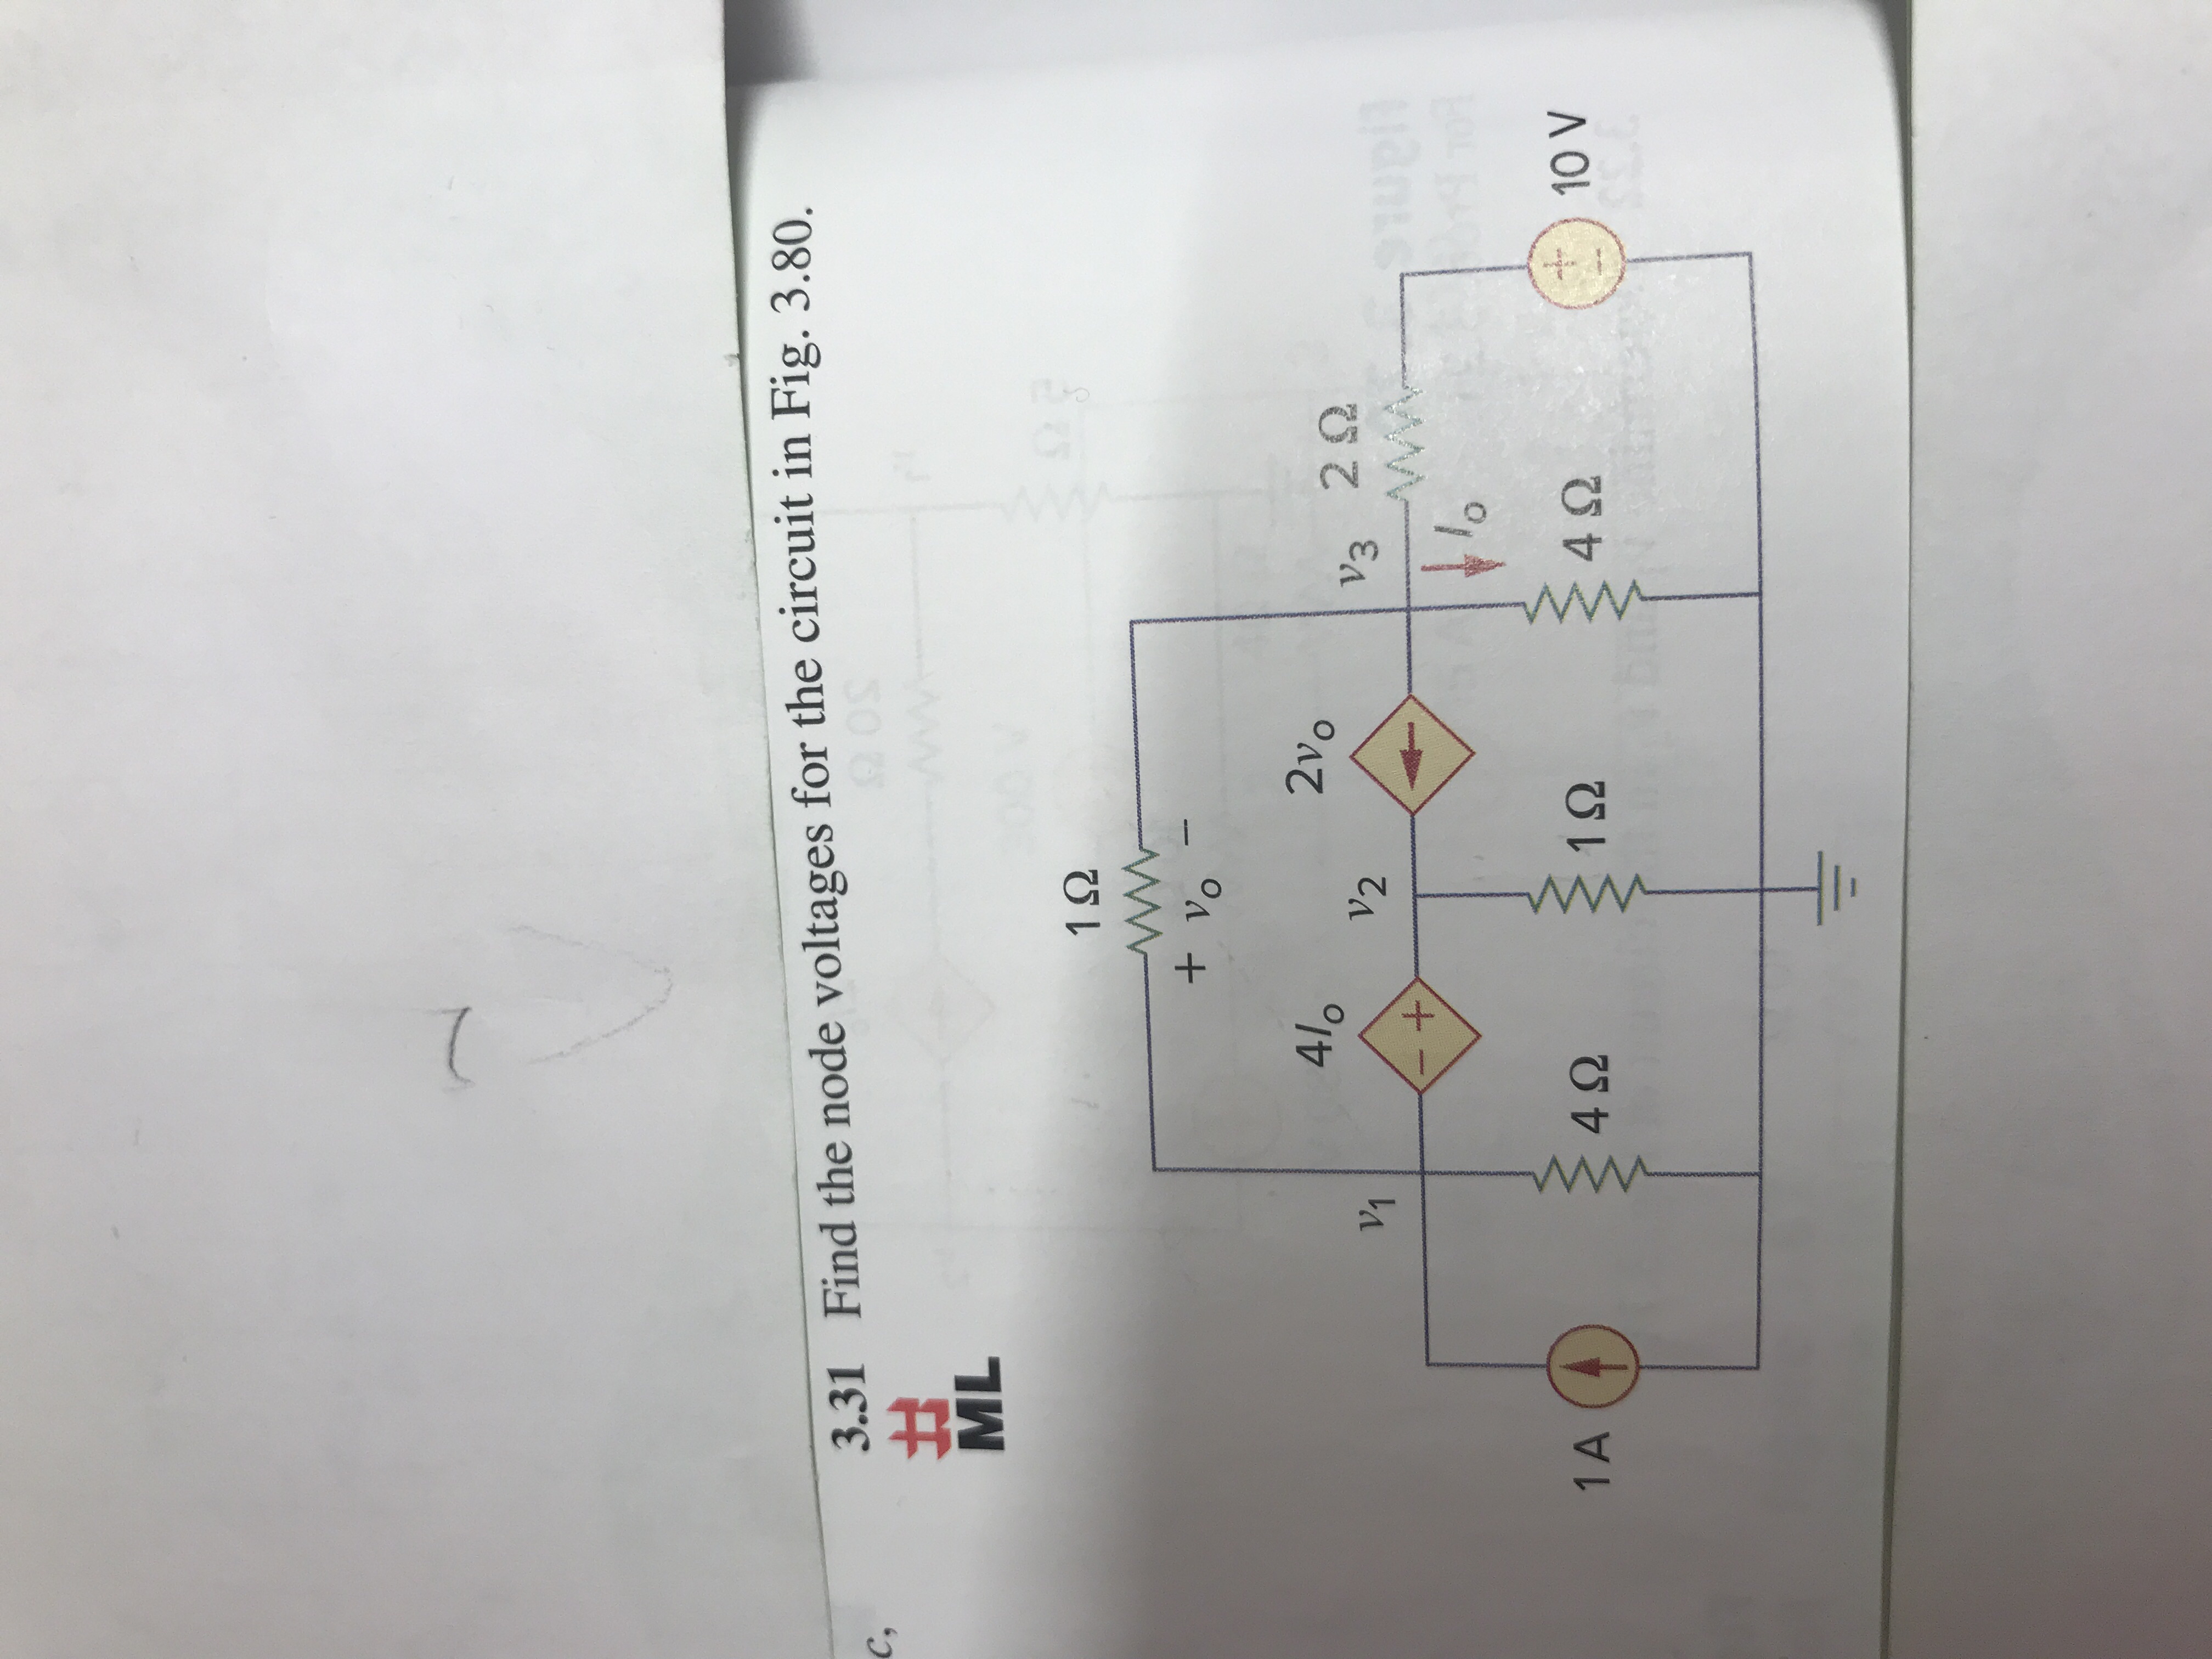 3.31 Find the node voltages for the circuit in Fig. 3.80.
C,
ML
1S2
4lo
2v
V1
V2
11o
4 92
4Ω
1S2
÷) 10V
1 A
